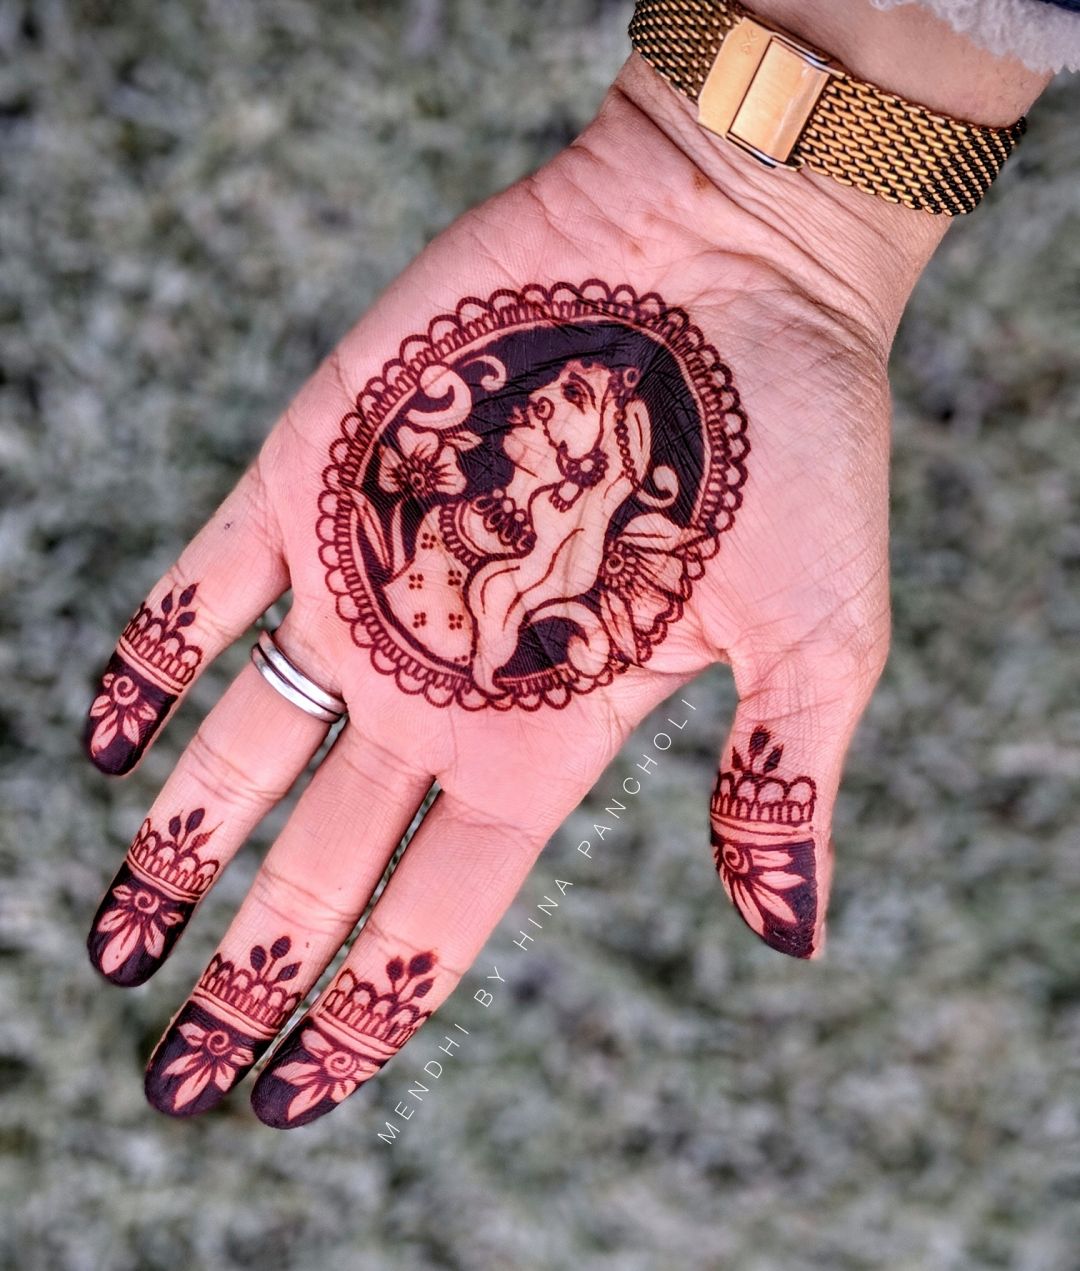 example of Mendhi by Hina Pancholi work on Shaadi Services